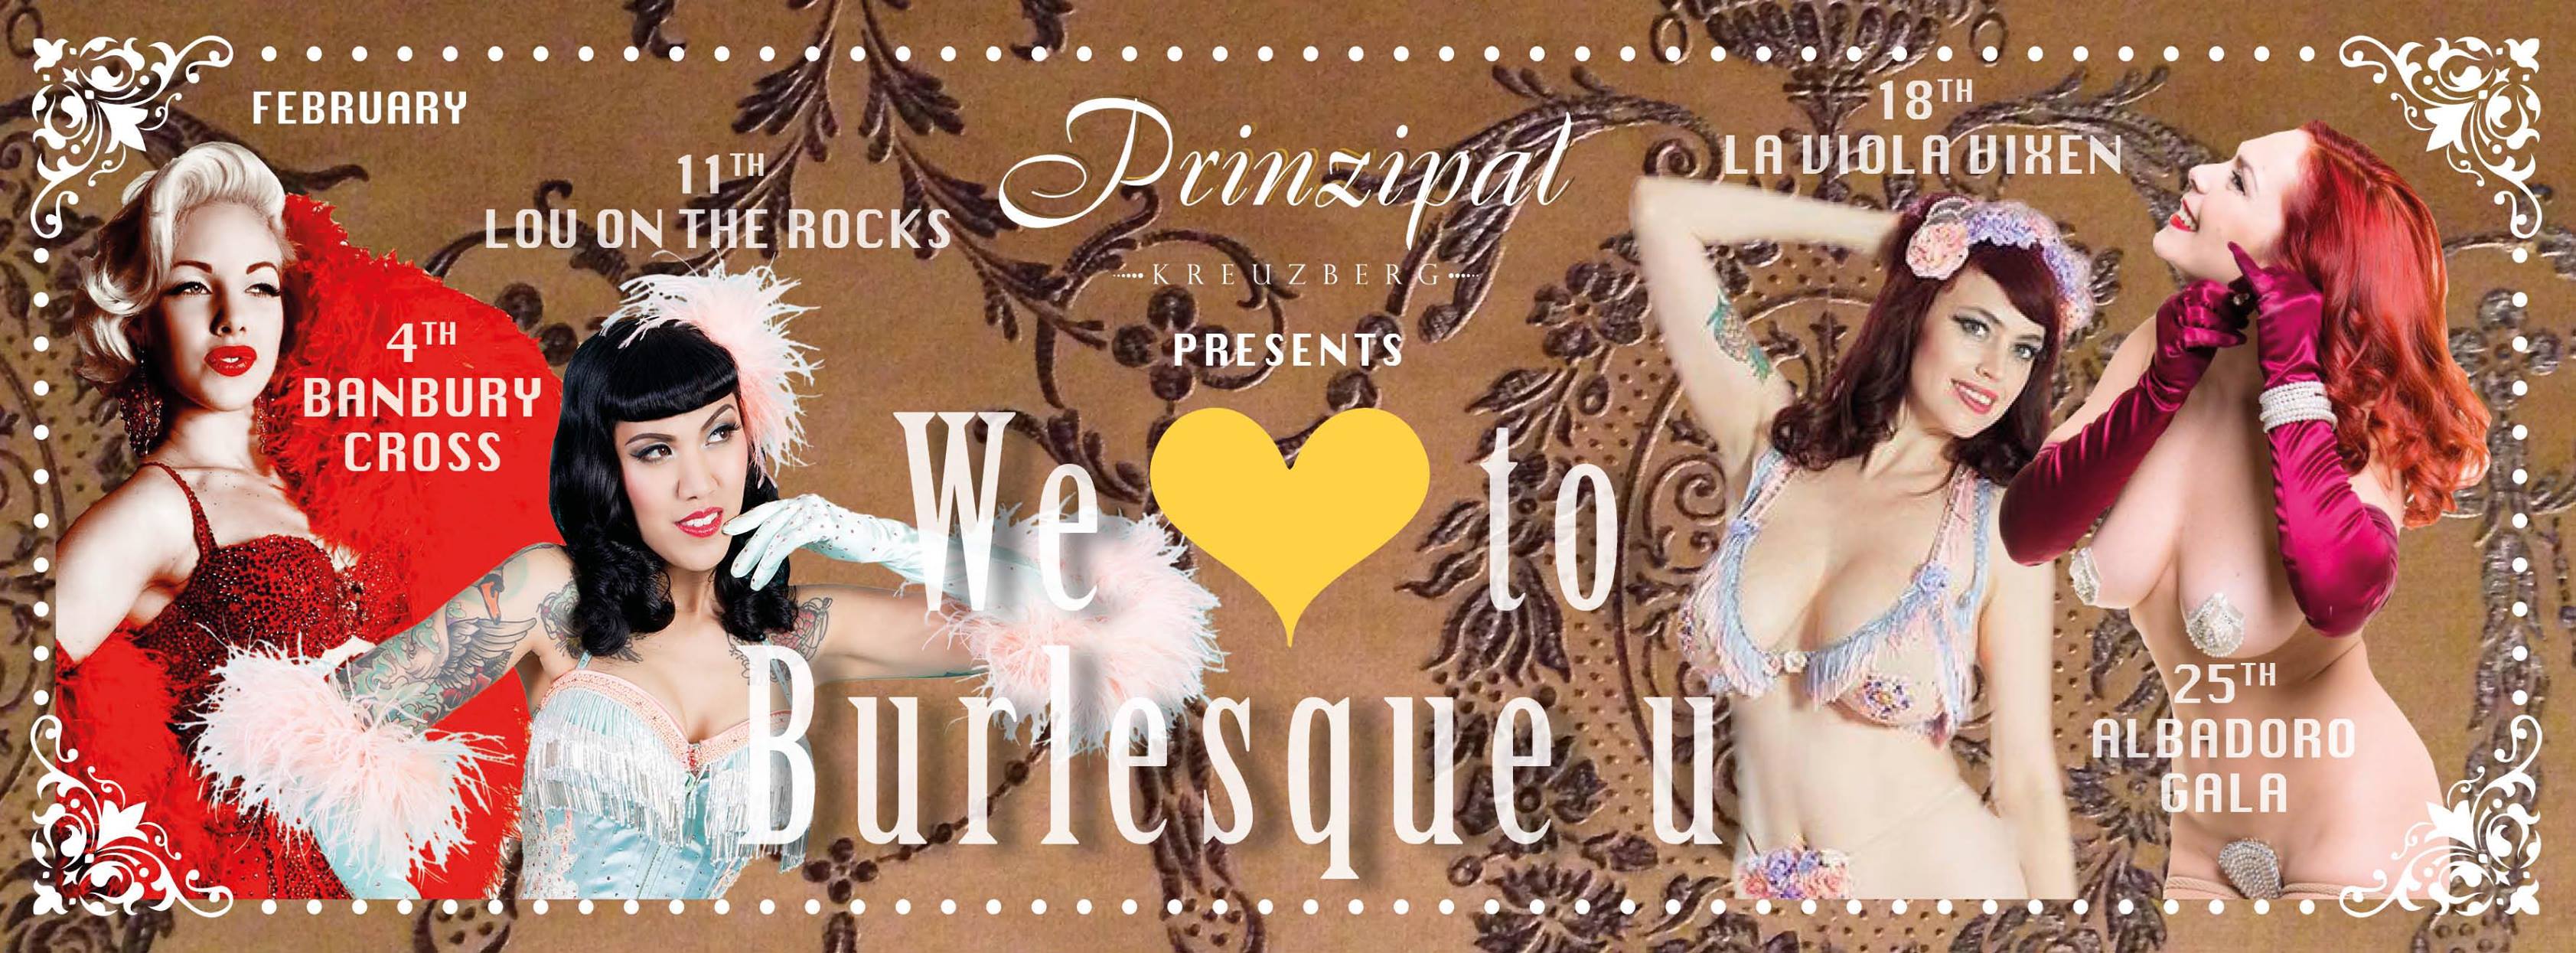 We Love To Burlesque You